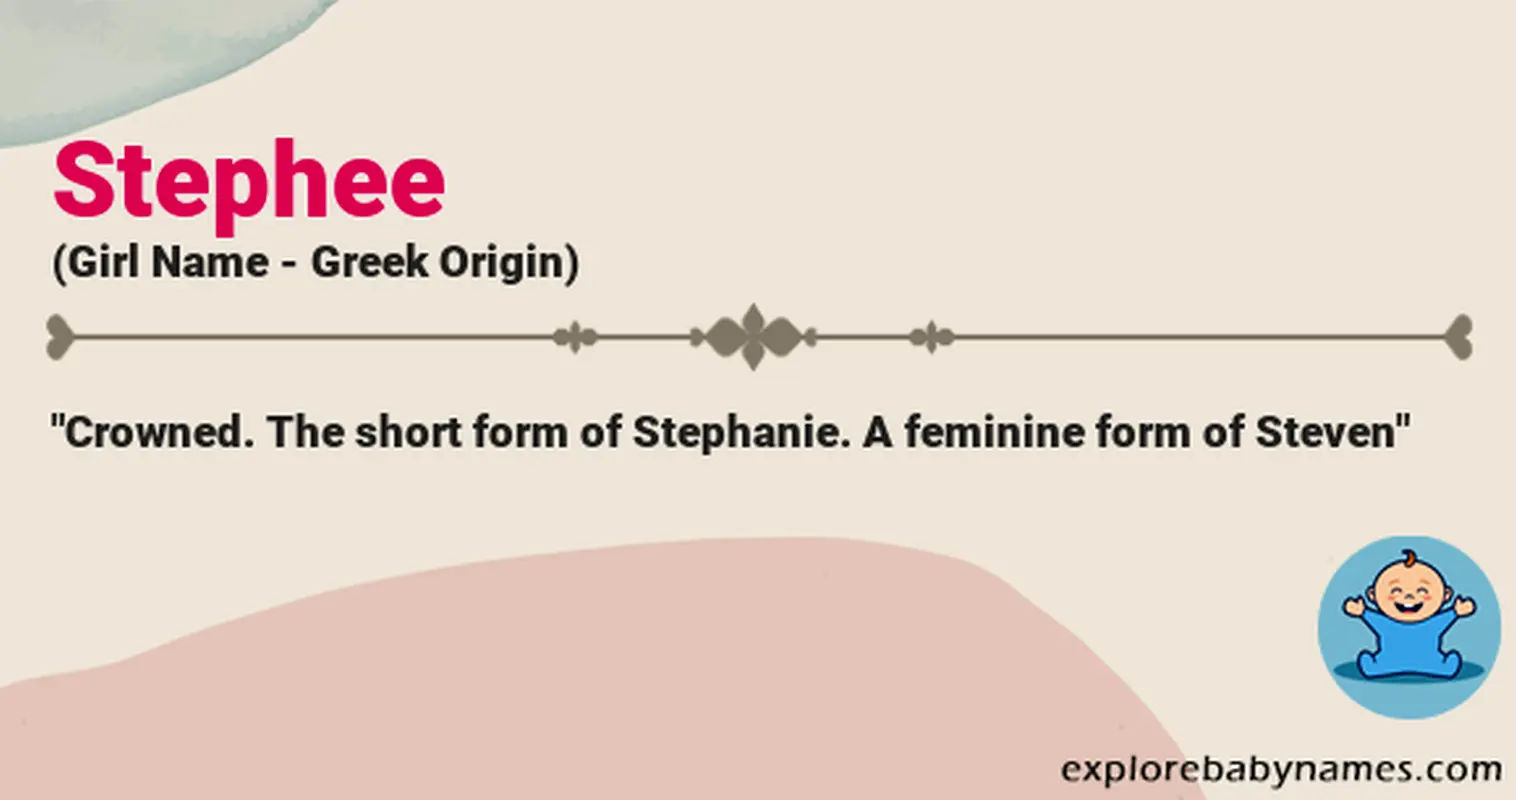 Meaning of Stephee